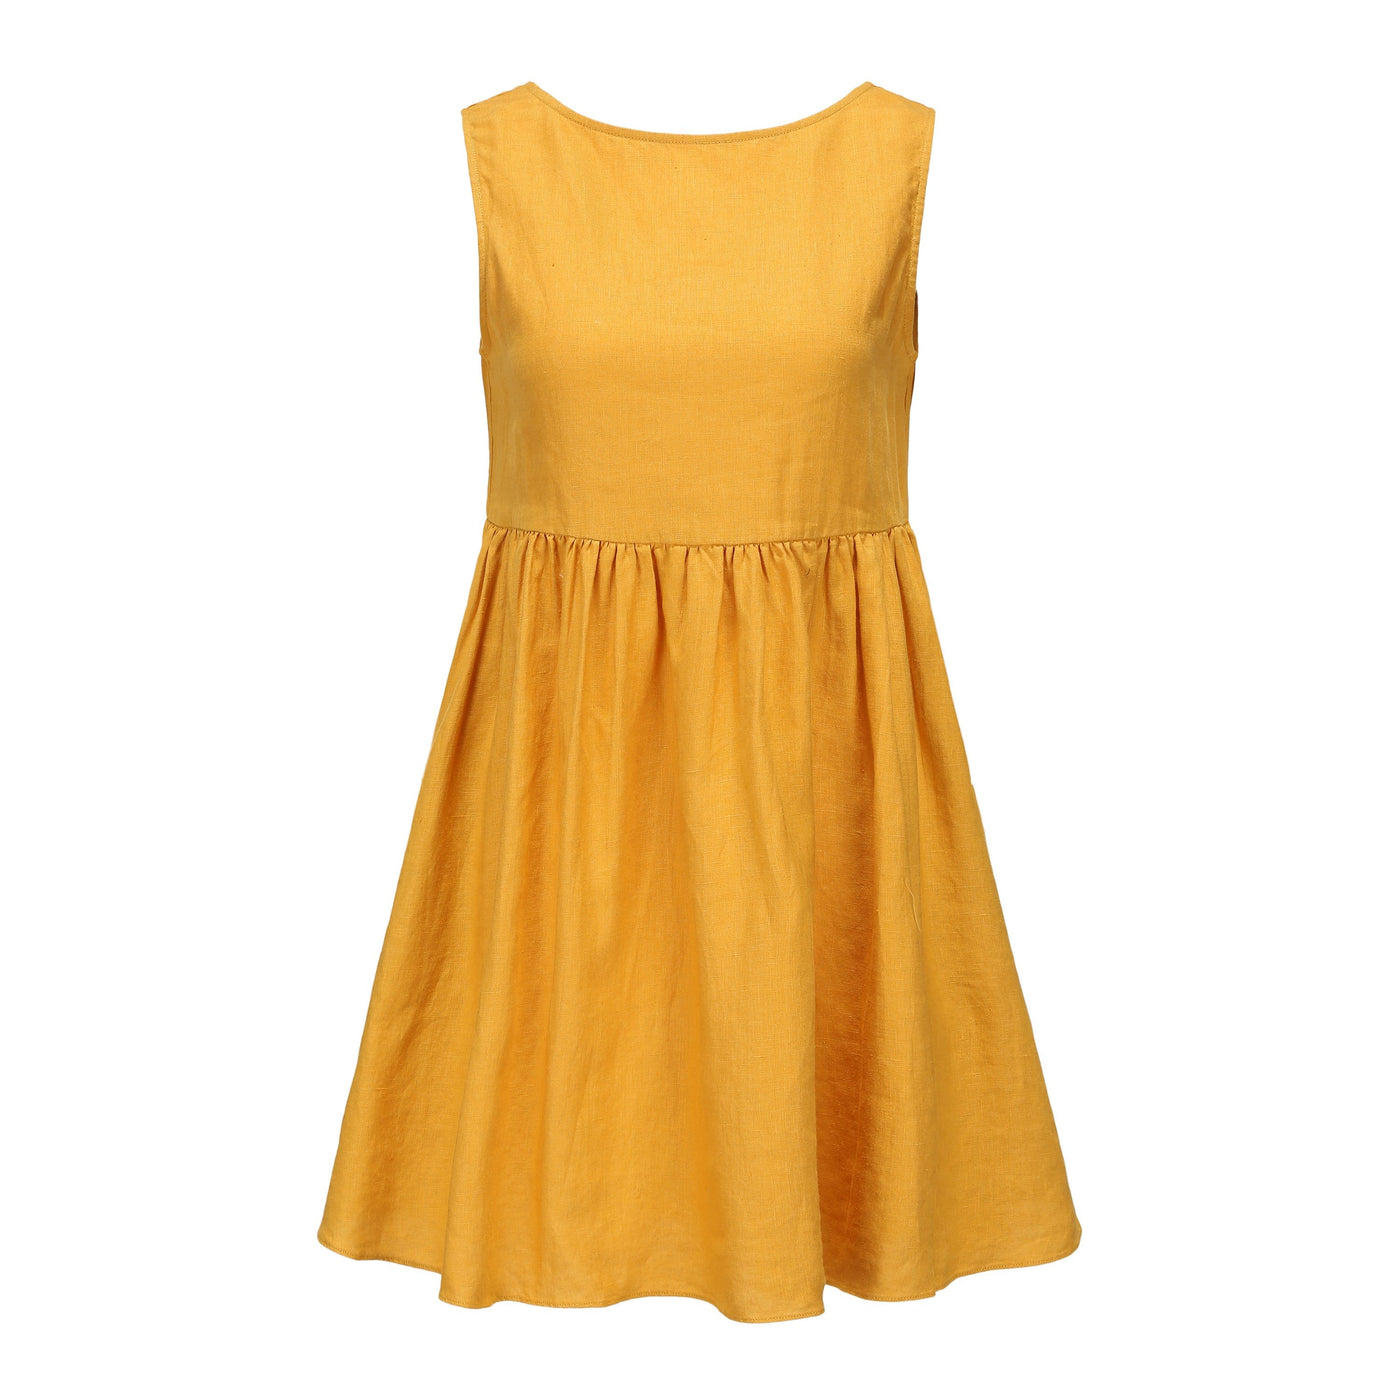 Lilly Pilly Collection 100% organic linen Harper Dress in Sunflower as 3D image showing front view